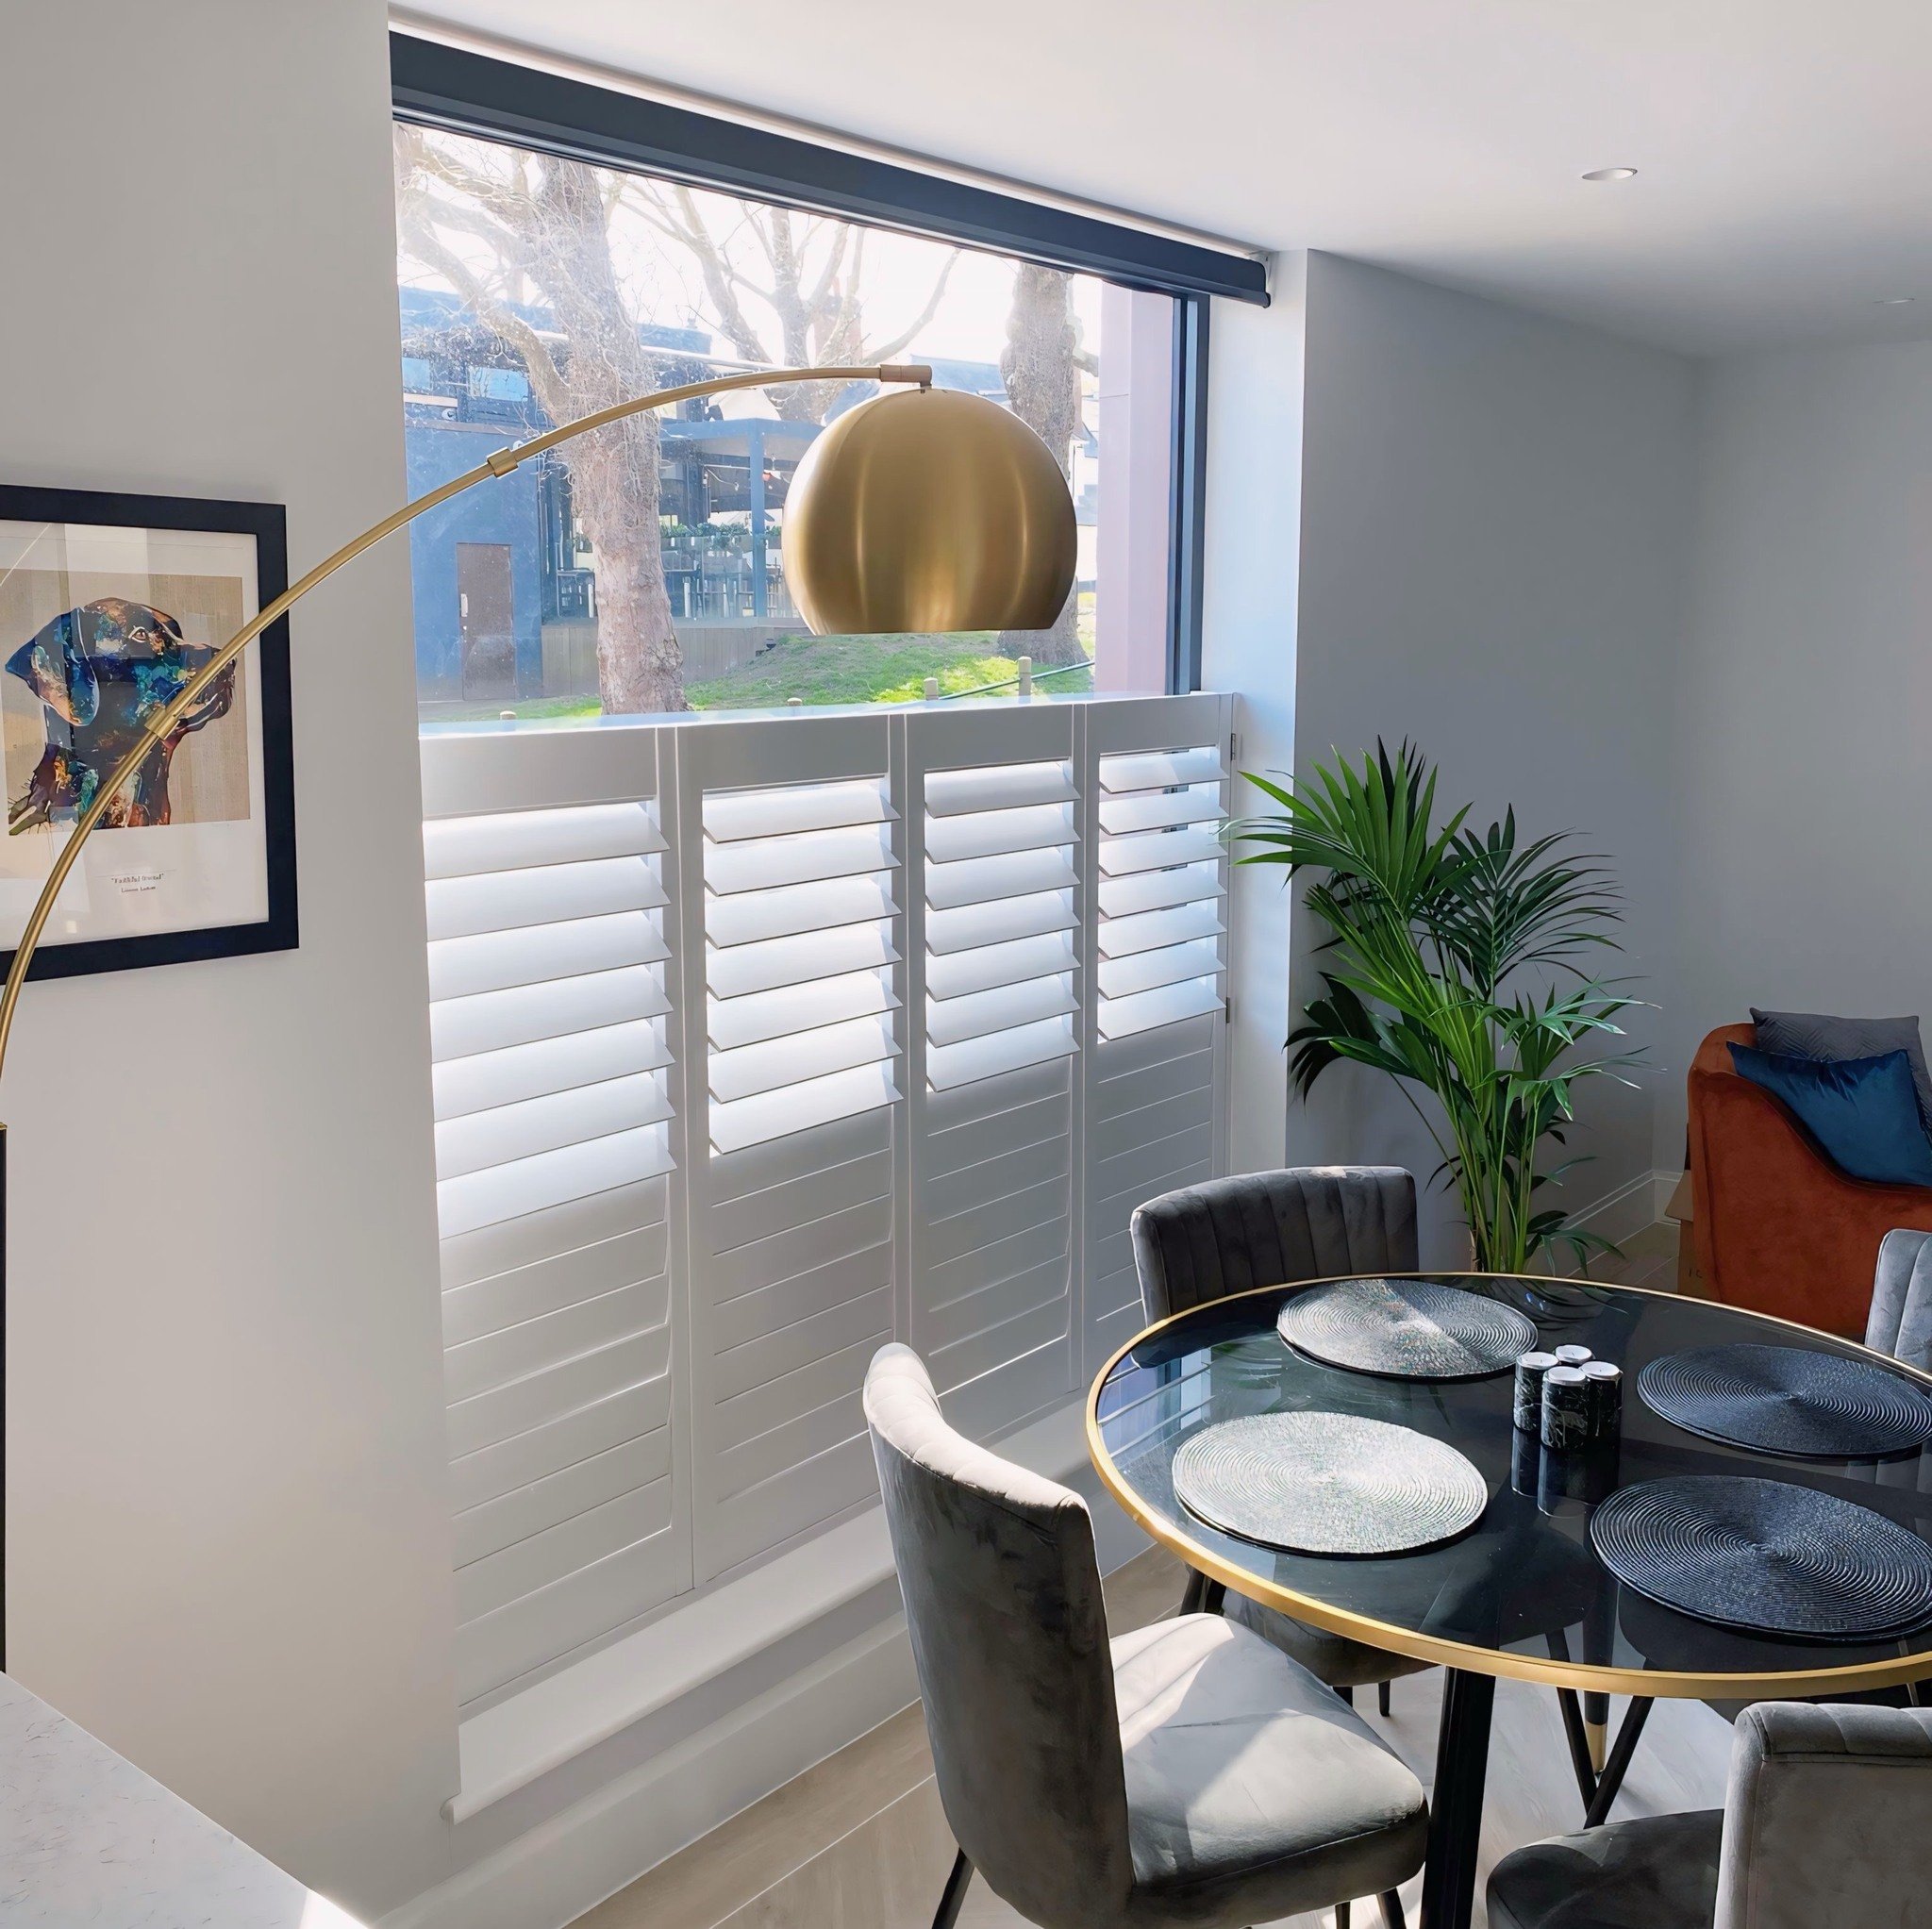 Our Customer's Vision Truly Came to Life With Our Solid Wood Cafe Style Shutters and Expertly Paired Roller Blinds. Crafted in Custom Colour Farrow and Ball Blackened with Stainless Hinges, our Cafe Style Shutters Exude Timeless Elegance. 

Paired Wi